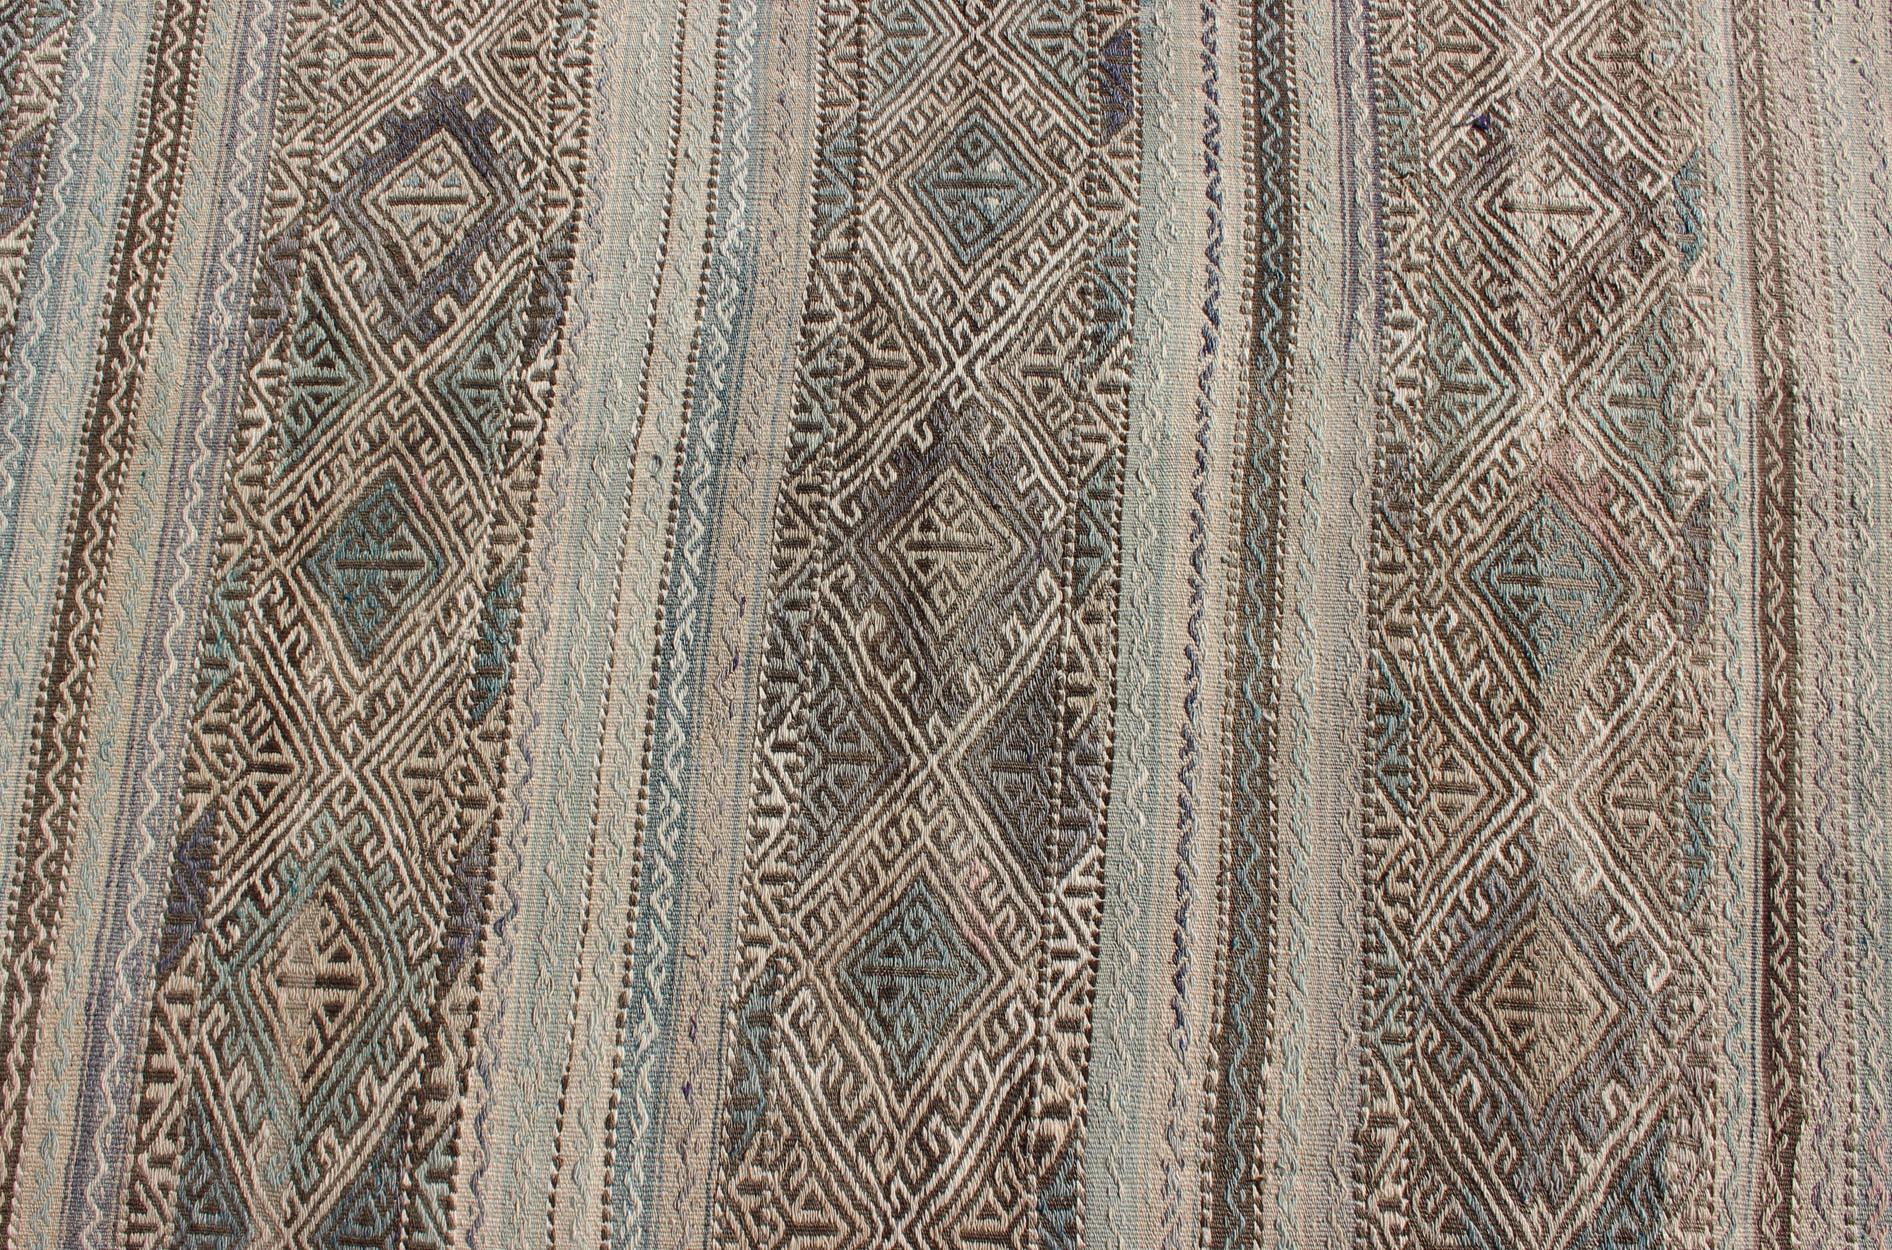 Wool Flat-Weave Embroideries Kilim in Taupe, Green, Teal, Blue and Brown For Sale